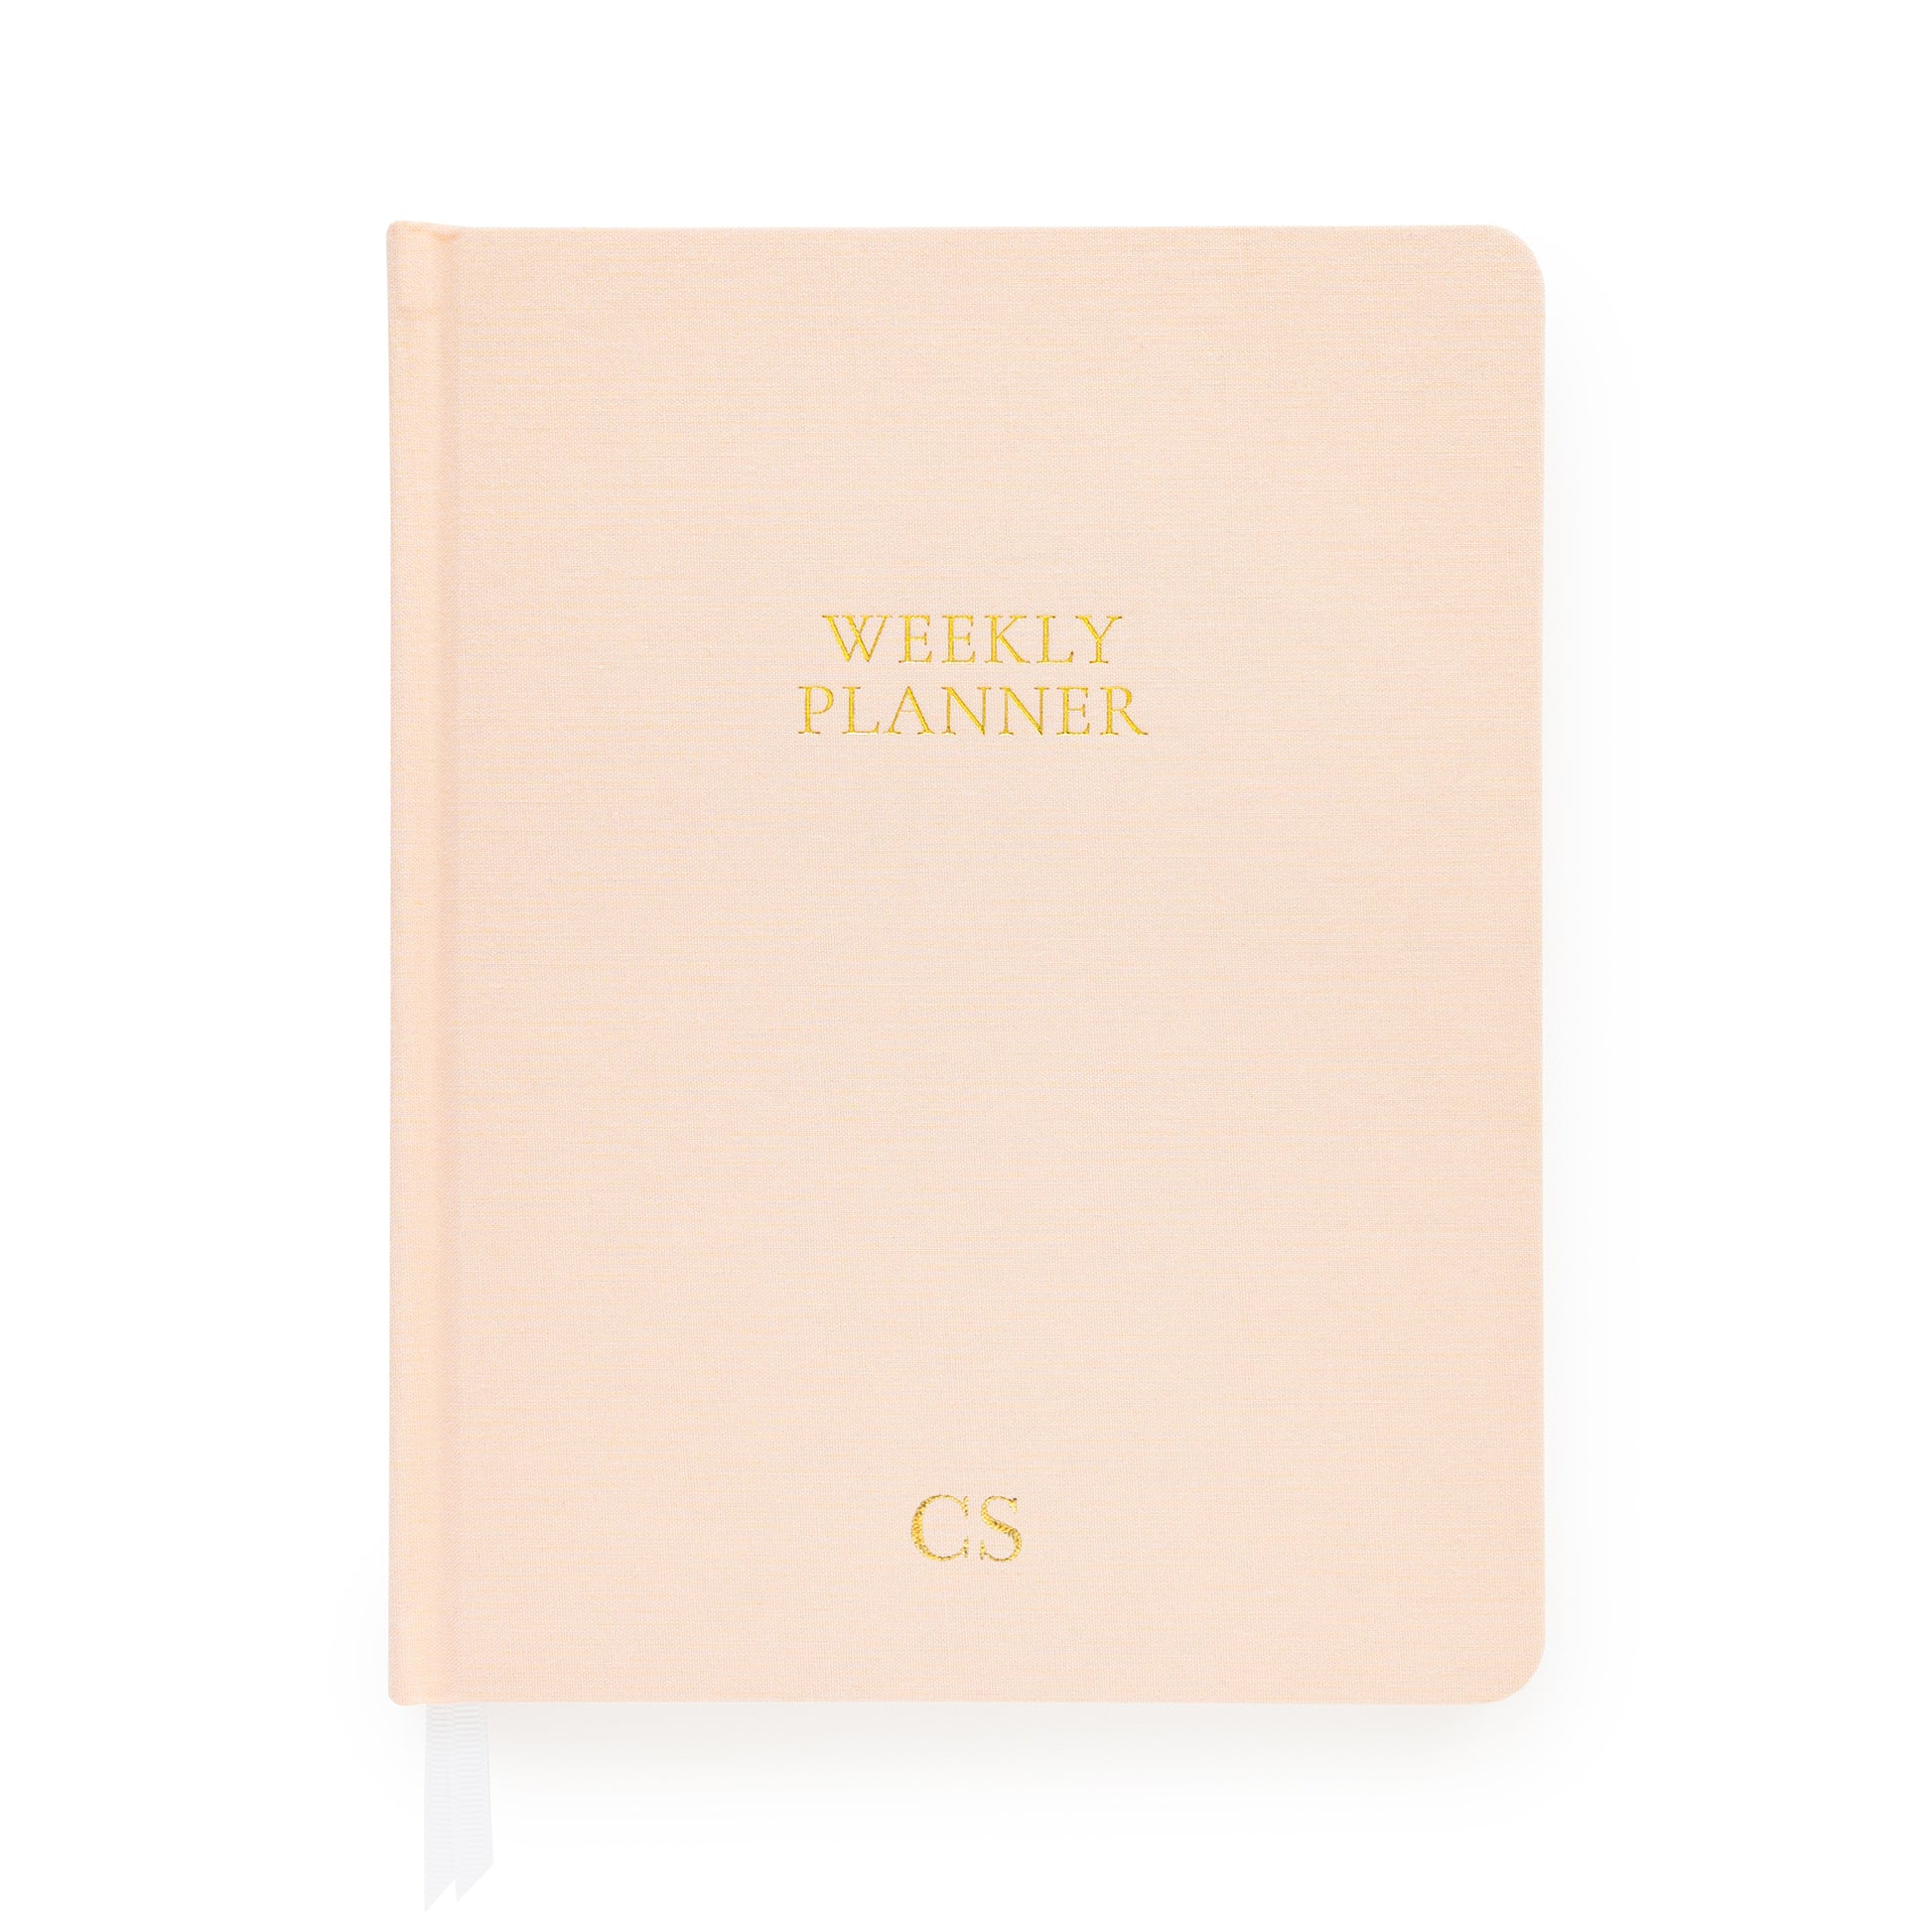 Pale pink weekly planner with gold foil initials